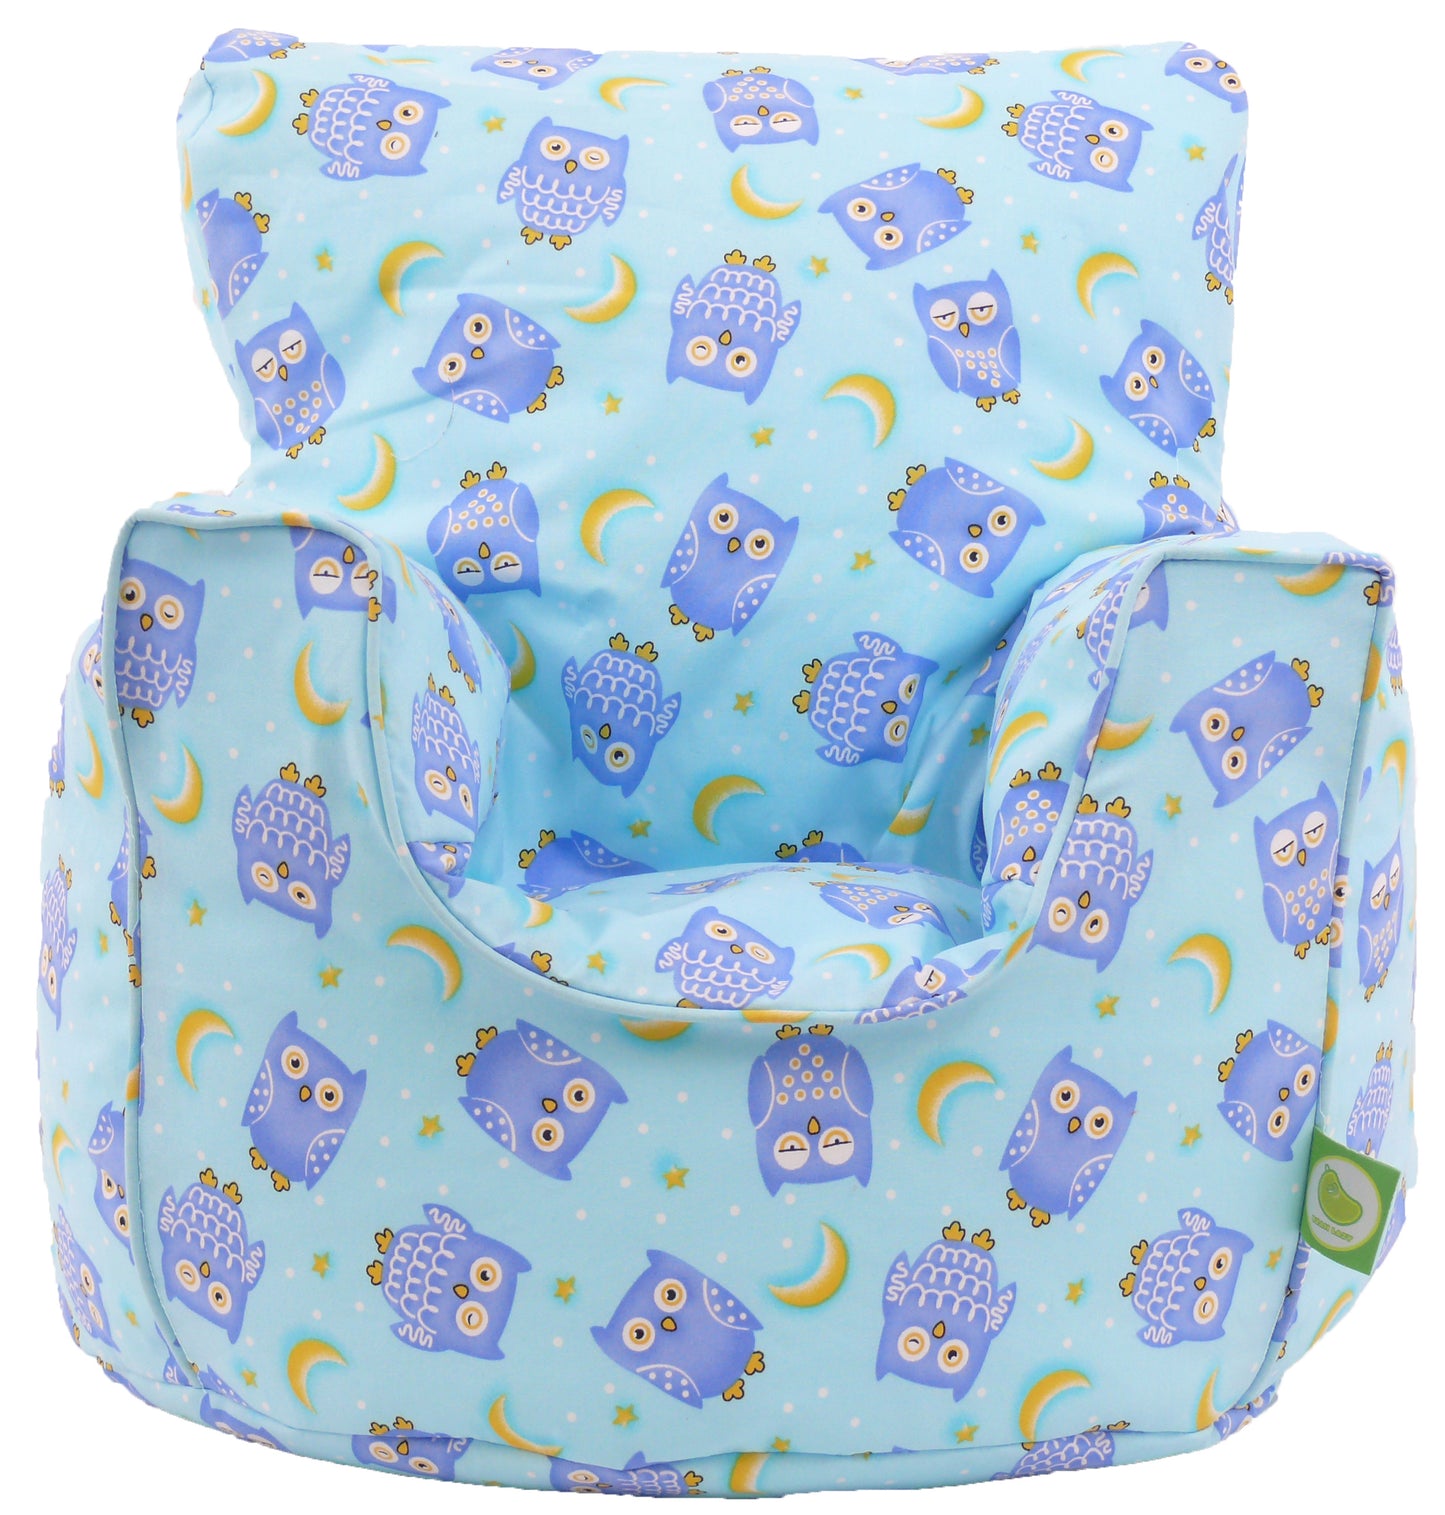 Cotton Blue Owl Bean Bag Arm Chair with Beans Child / Teen size